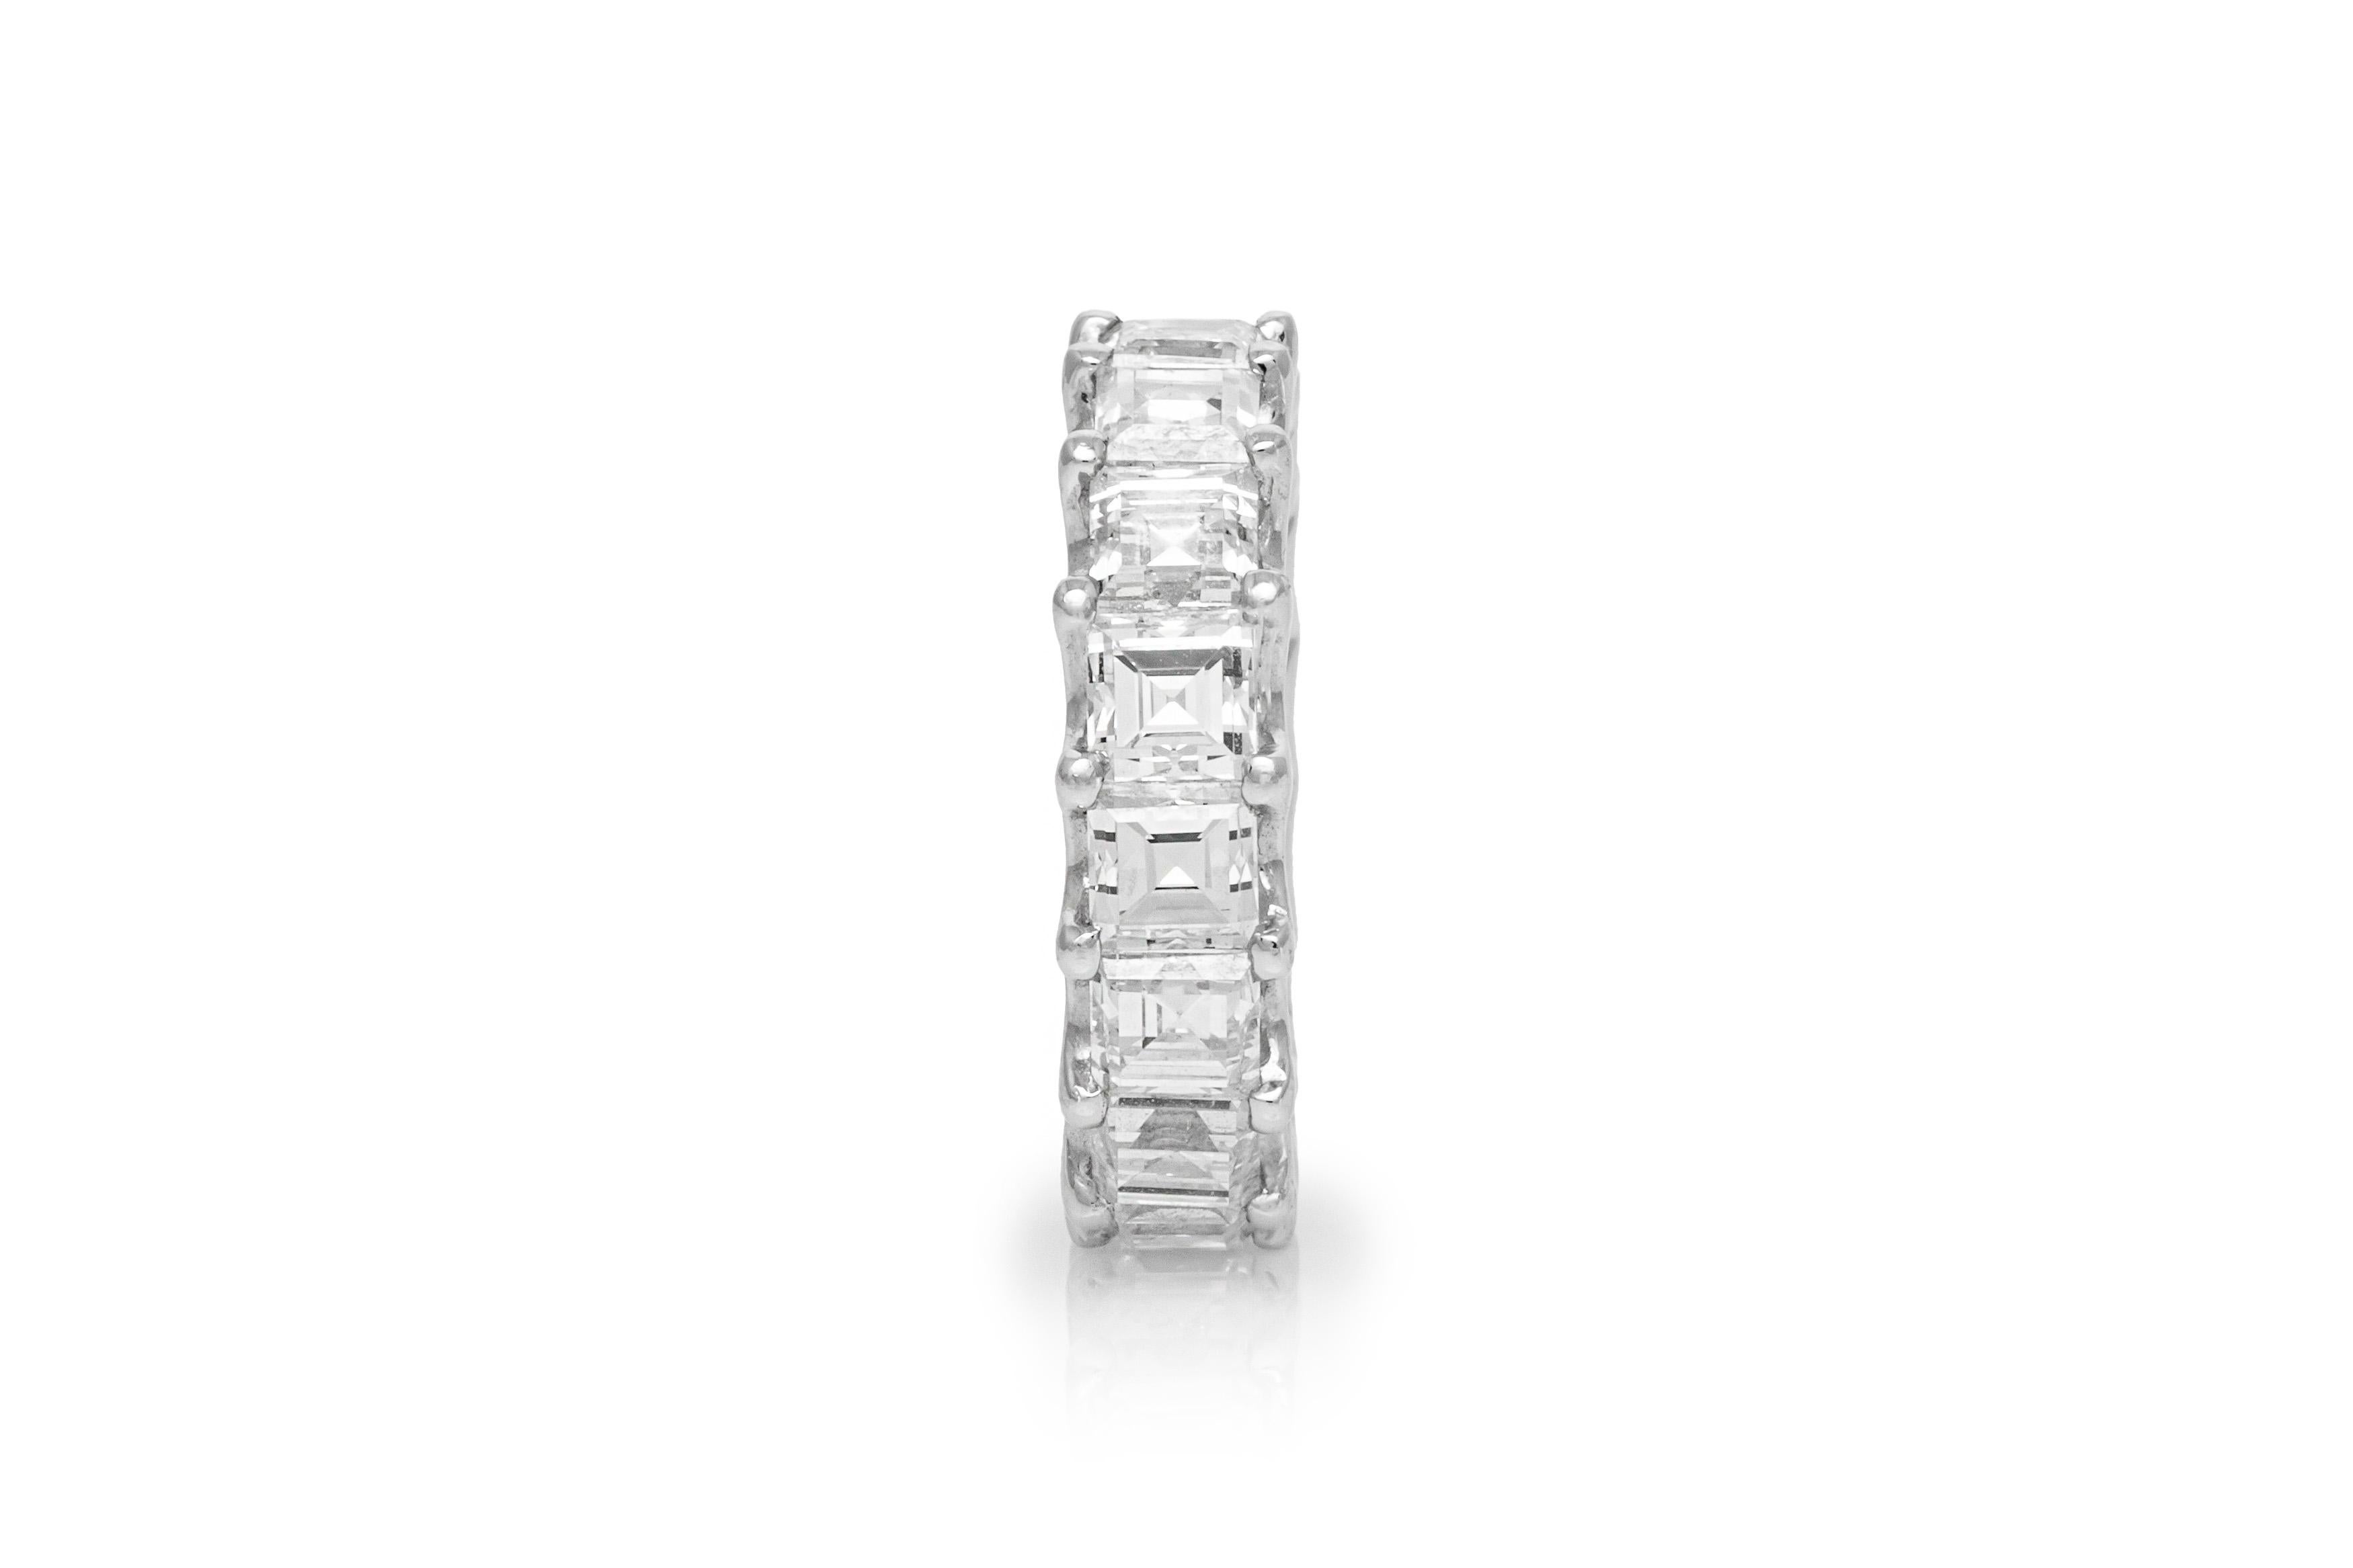 Estate Platinum Eternity Ring features 16 beautifully matched square emerald cut diamonds, weighing a total of 8.12 carats. Ring Size 5.5. May be sized upon request. Additional charges may apply.  Circa 1990's.

